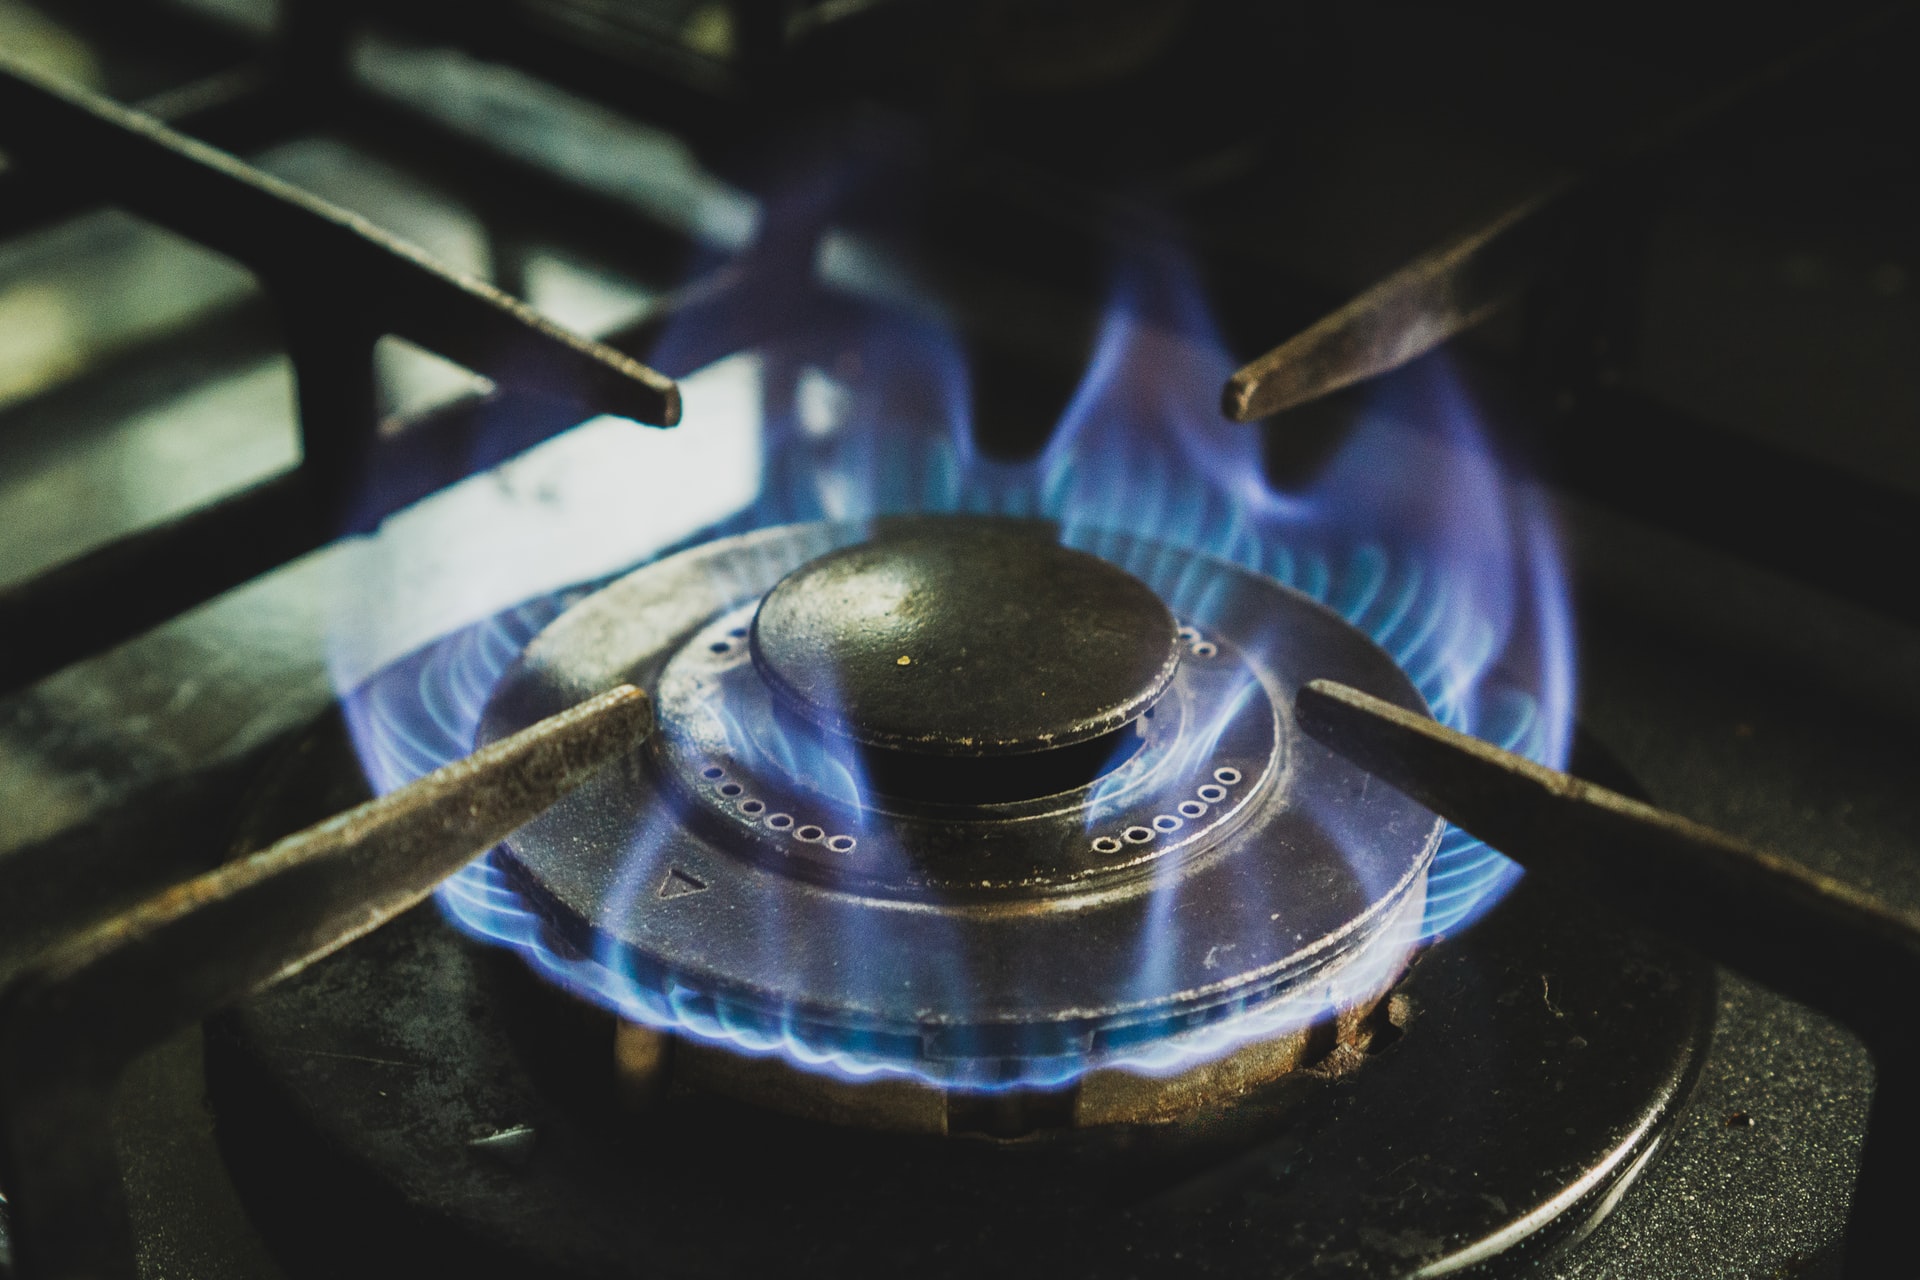 A gas burner on a hob being lit to show blue flames ready to cook on